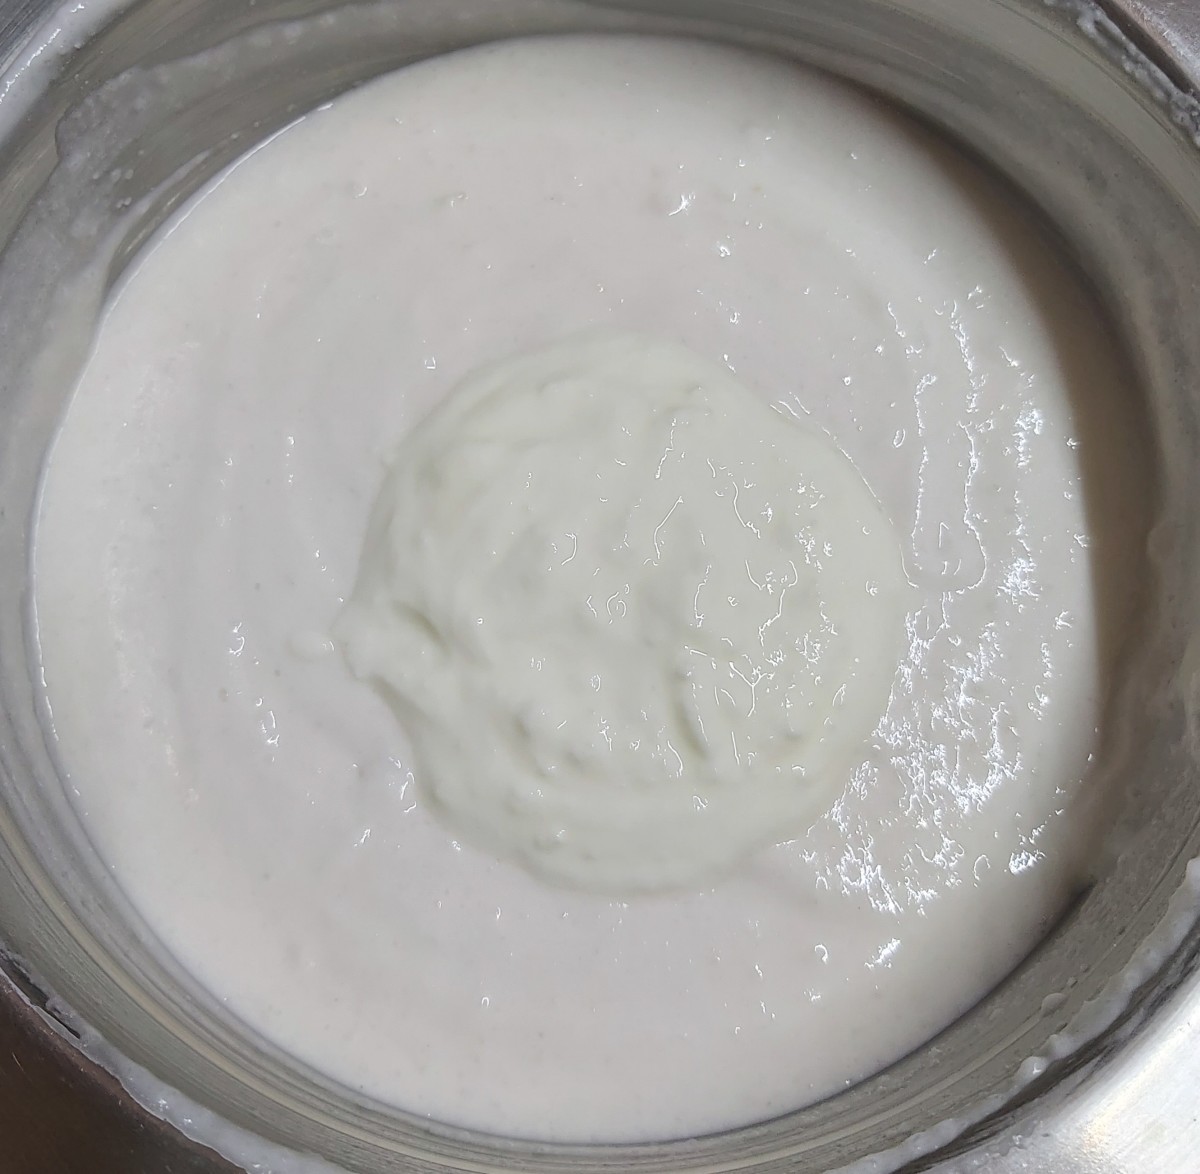 Add 1/4 cup of whisked curd to the batter mixture. Mix, close the lid and keep the batter to ferment for 8-9 hours or overnight.